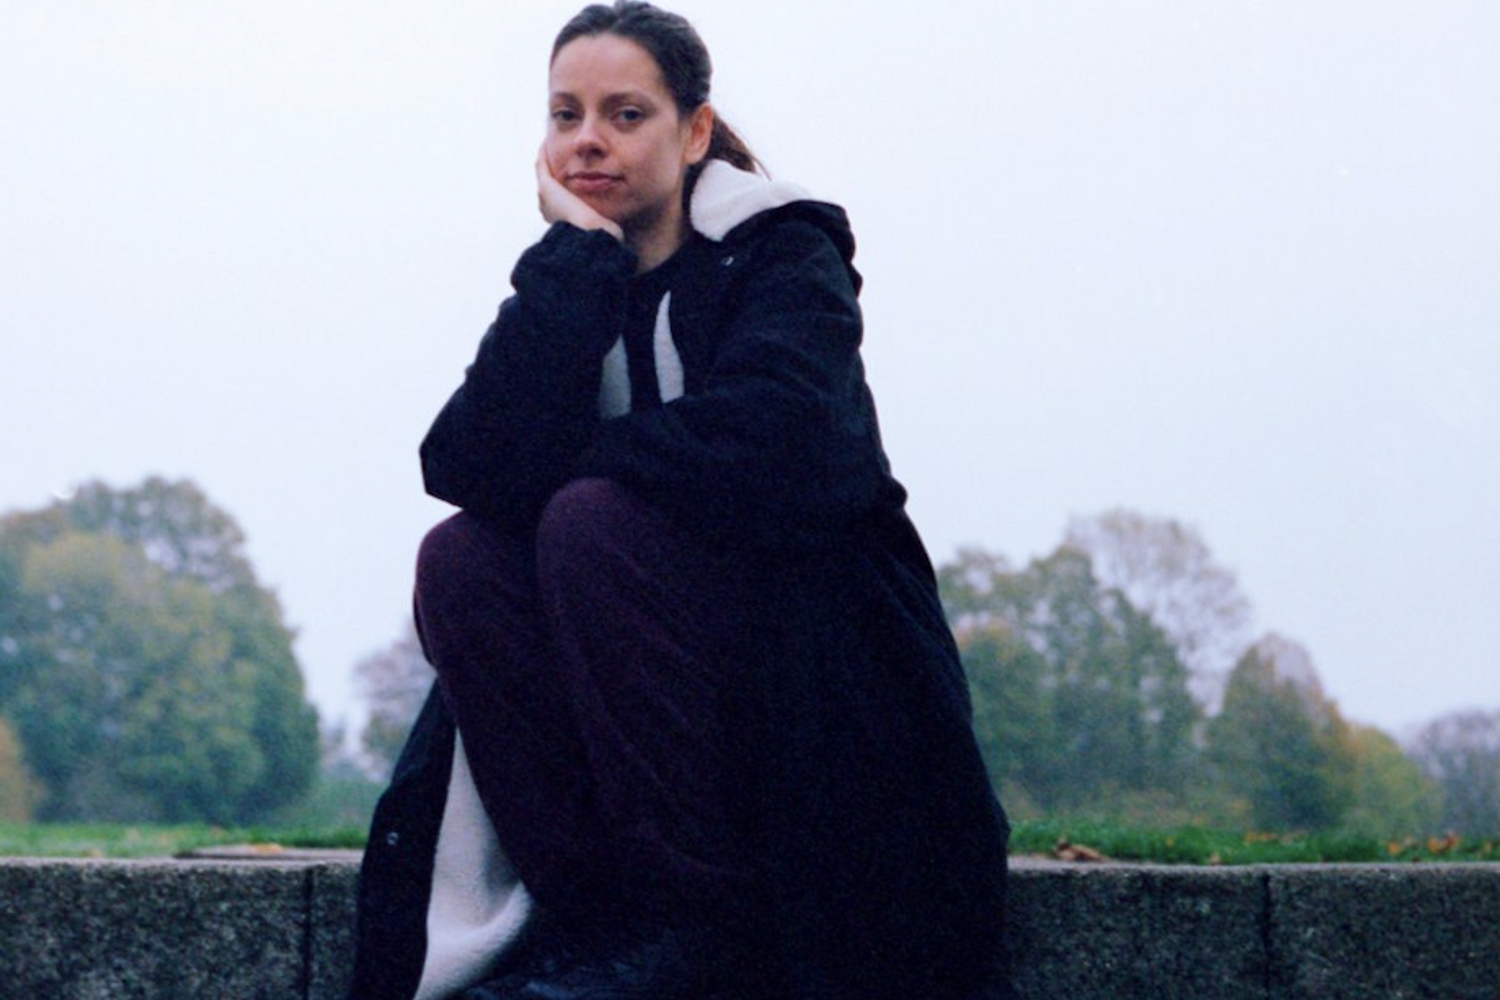 Tirzah returns with 'Send Me'